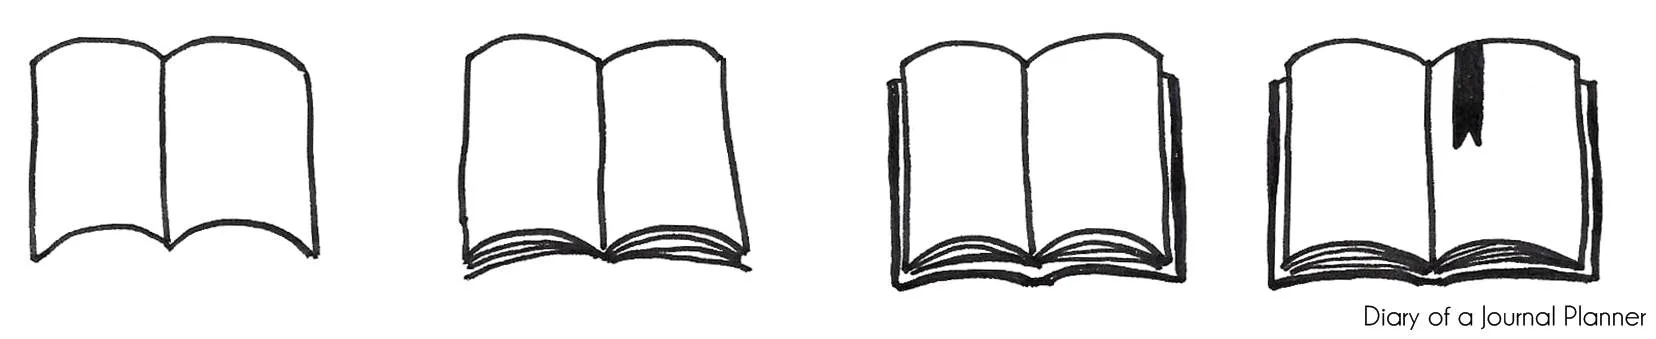 How to Draw an Open Book - Really Easy Drawing Tutorial